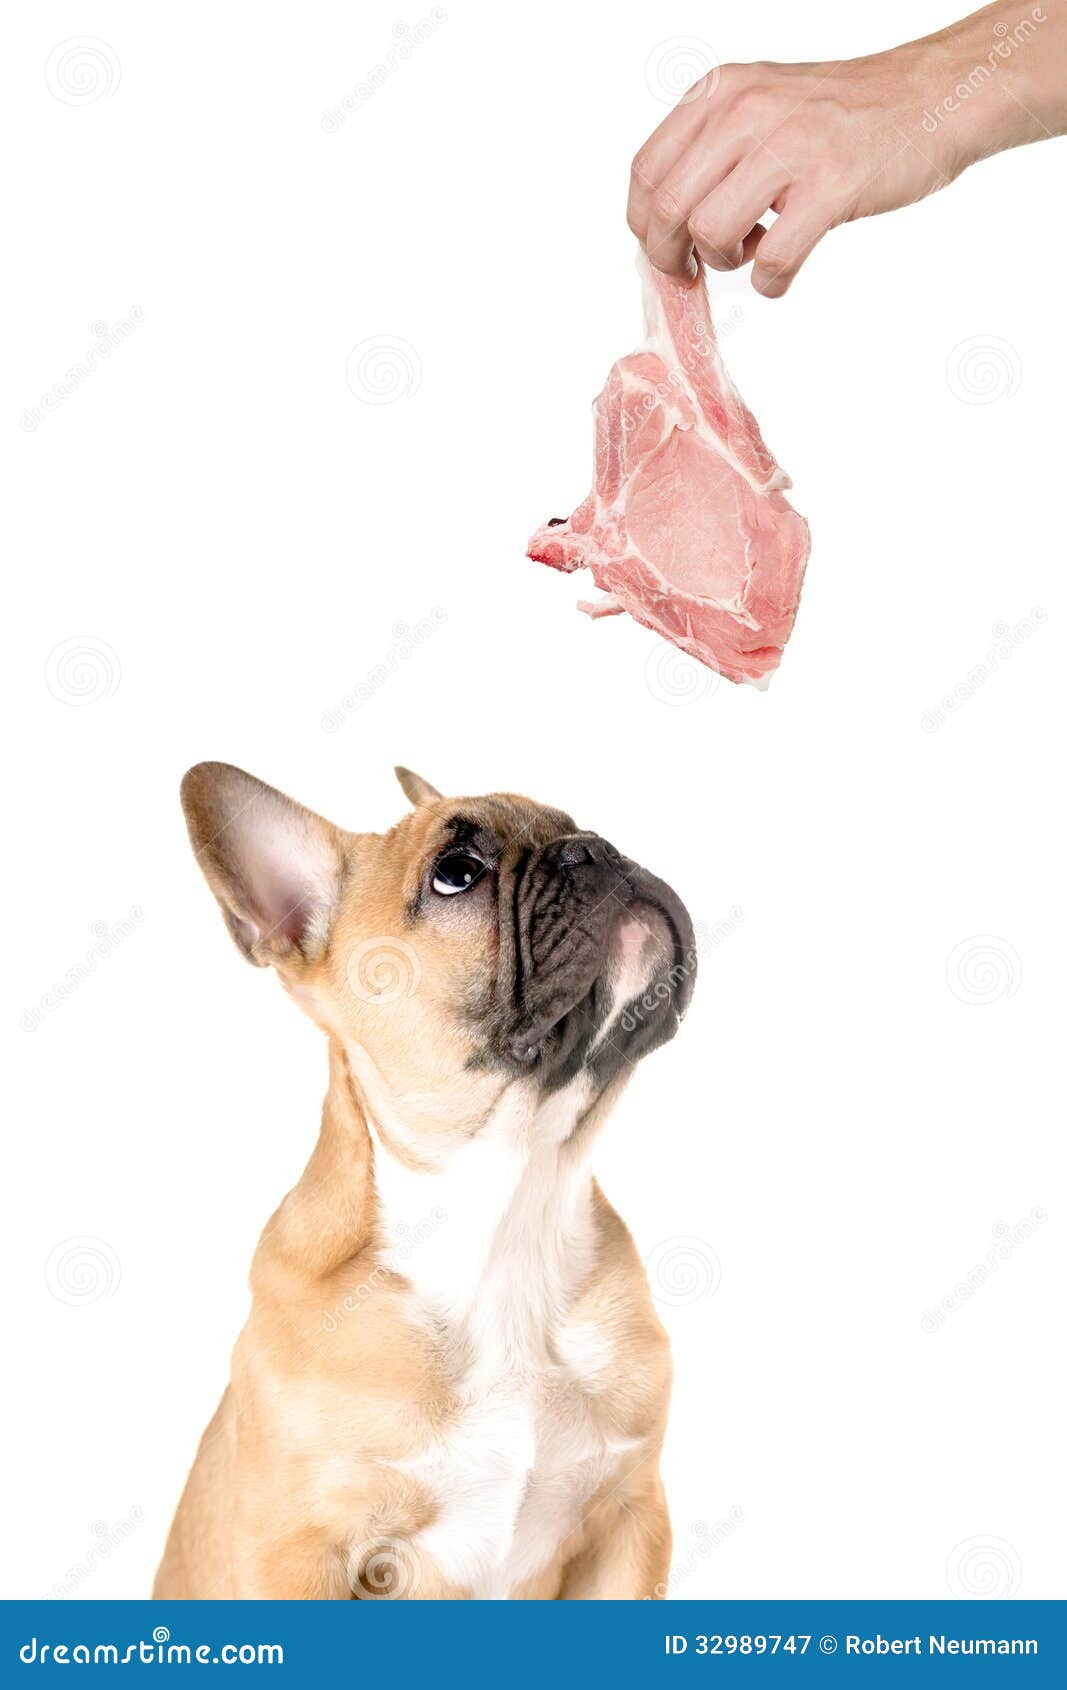 Meat for the dog. A dog looks after a piece of meat before white background